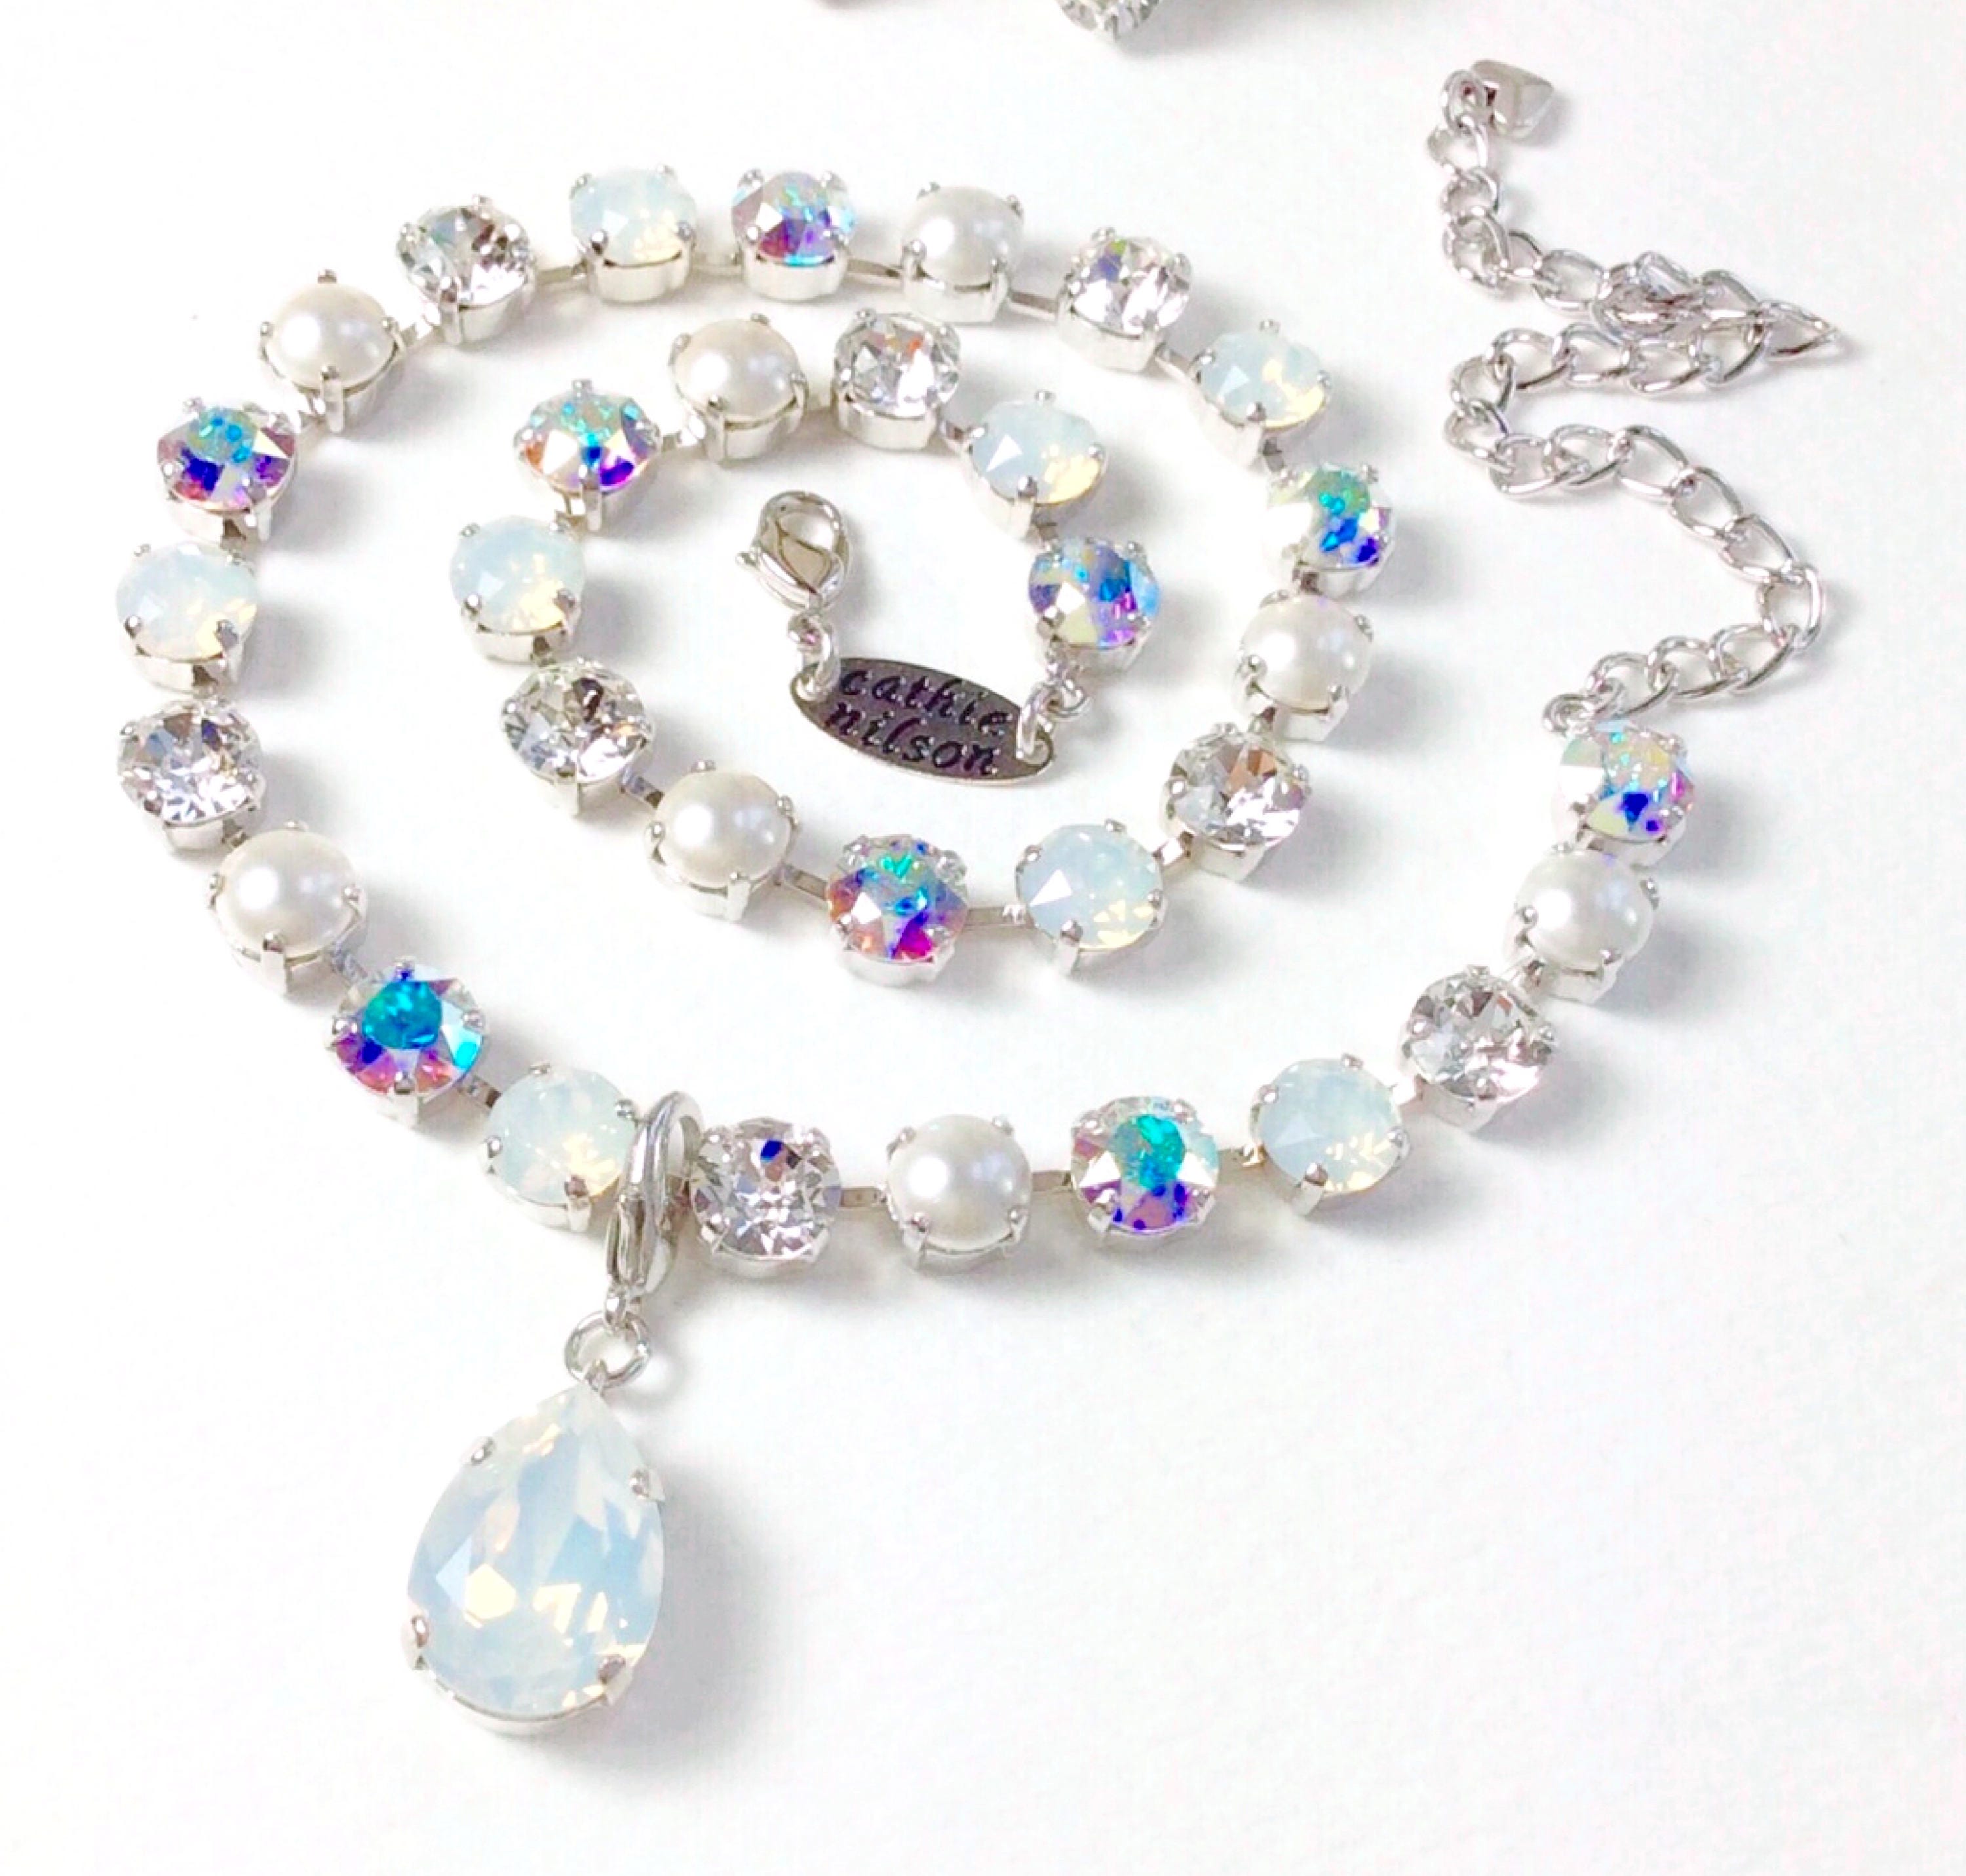 Swarovski Crystal 8.5mm Necklace "Bridal Whites" with Pearls - White Opal, AB, Crystal & Pearls - Designer Inspired - FREE SHIPPING